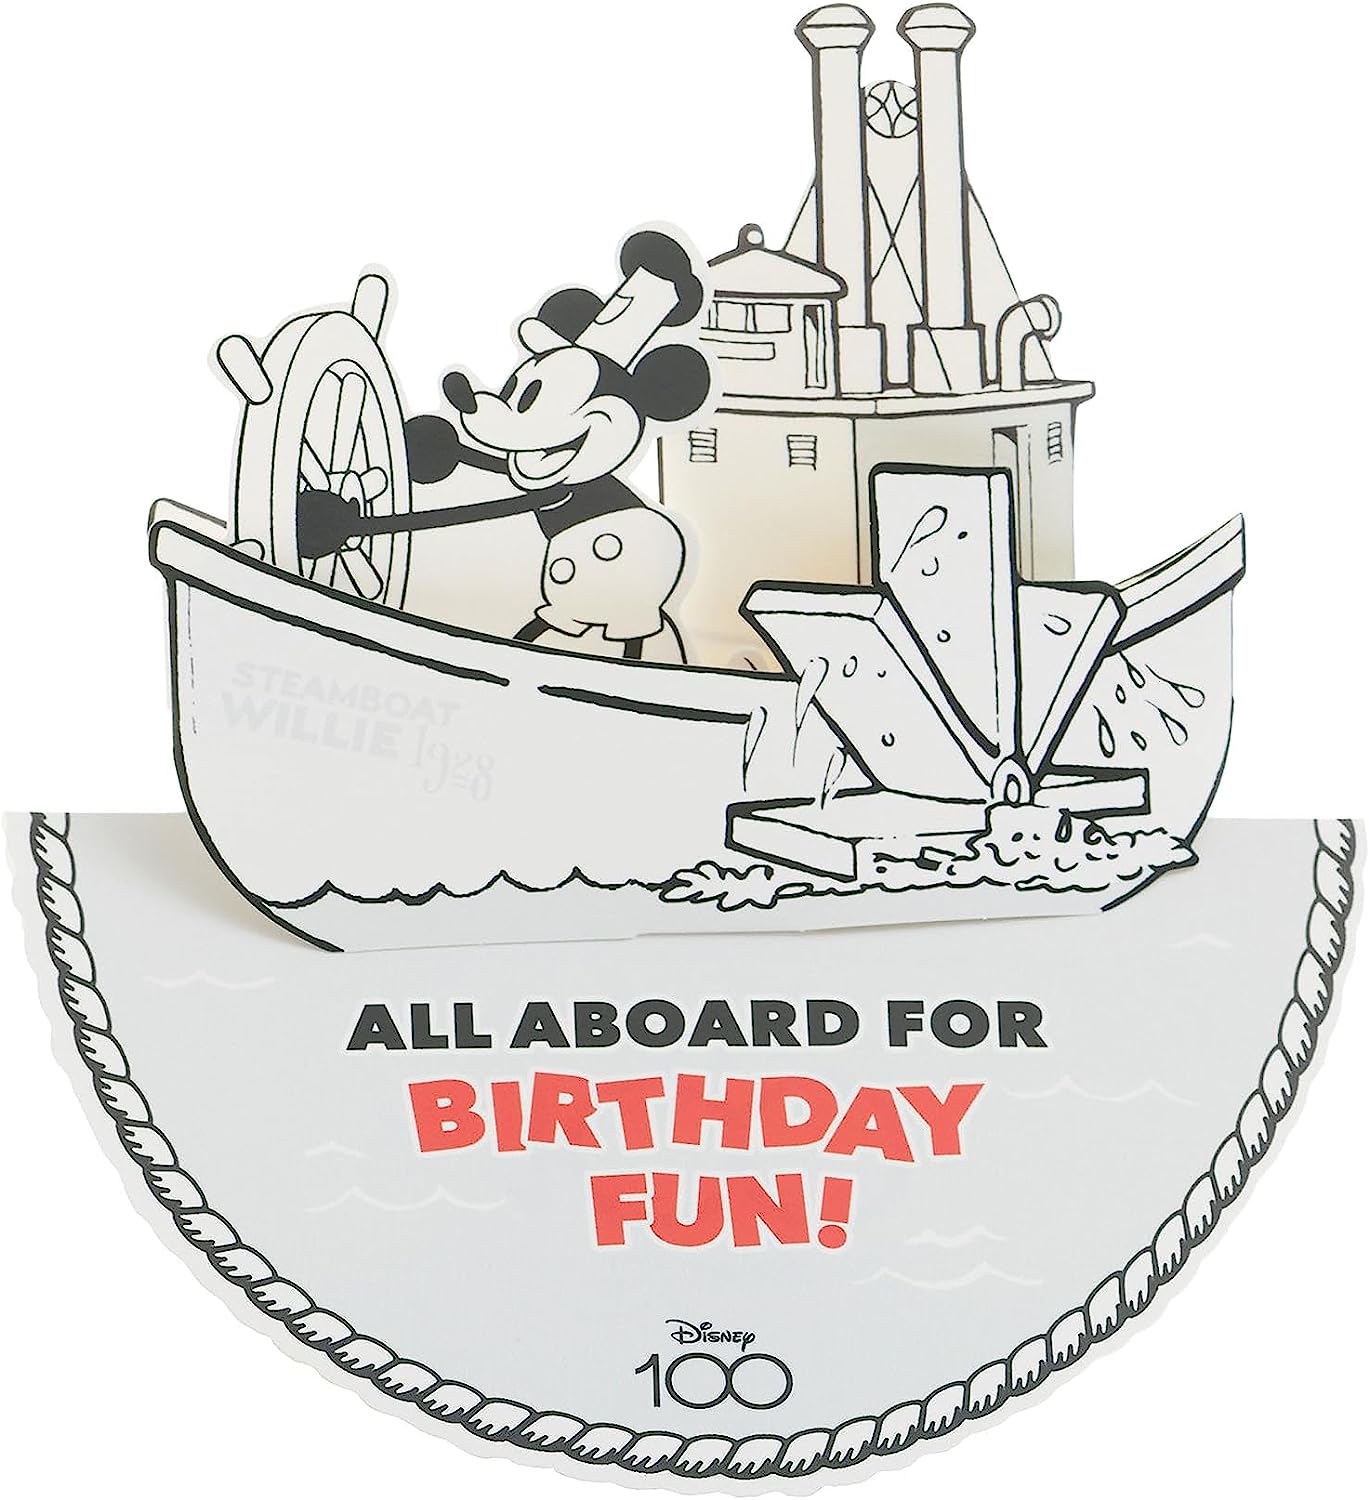 Disney 100 Pop Up Steamboat Willie Mickey Mouse Design Birthday Card